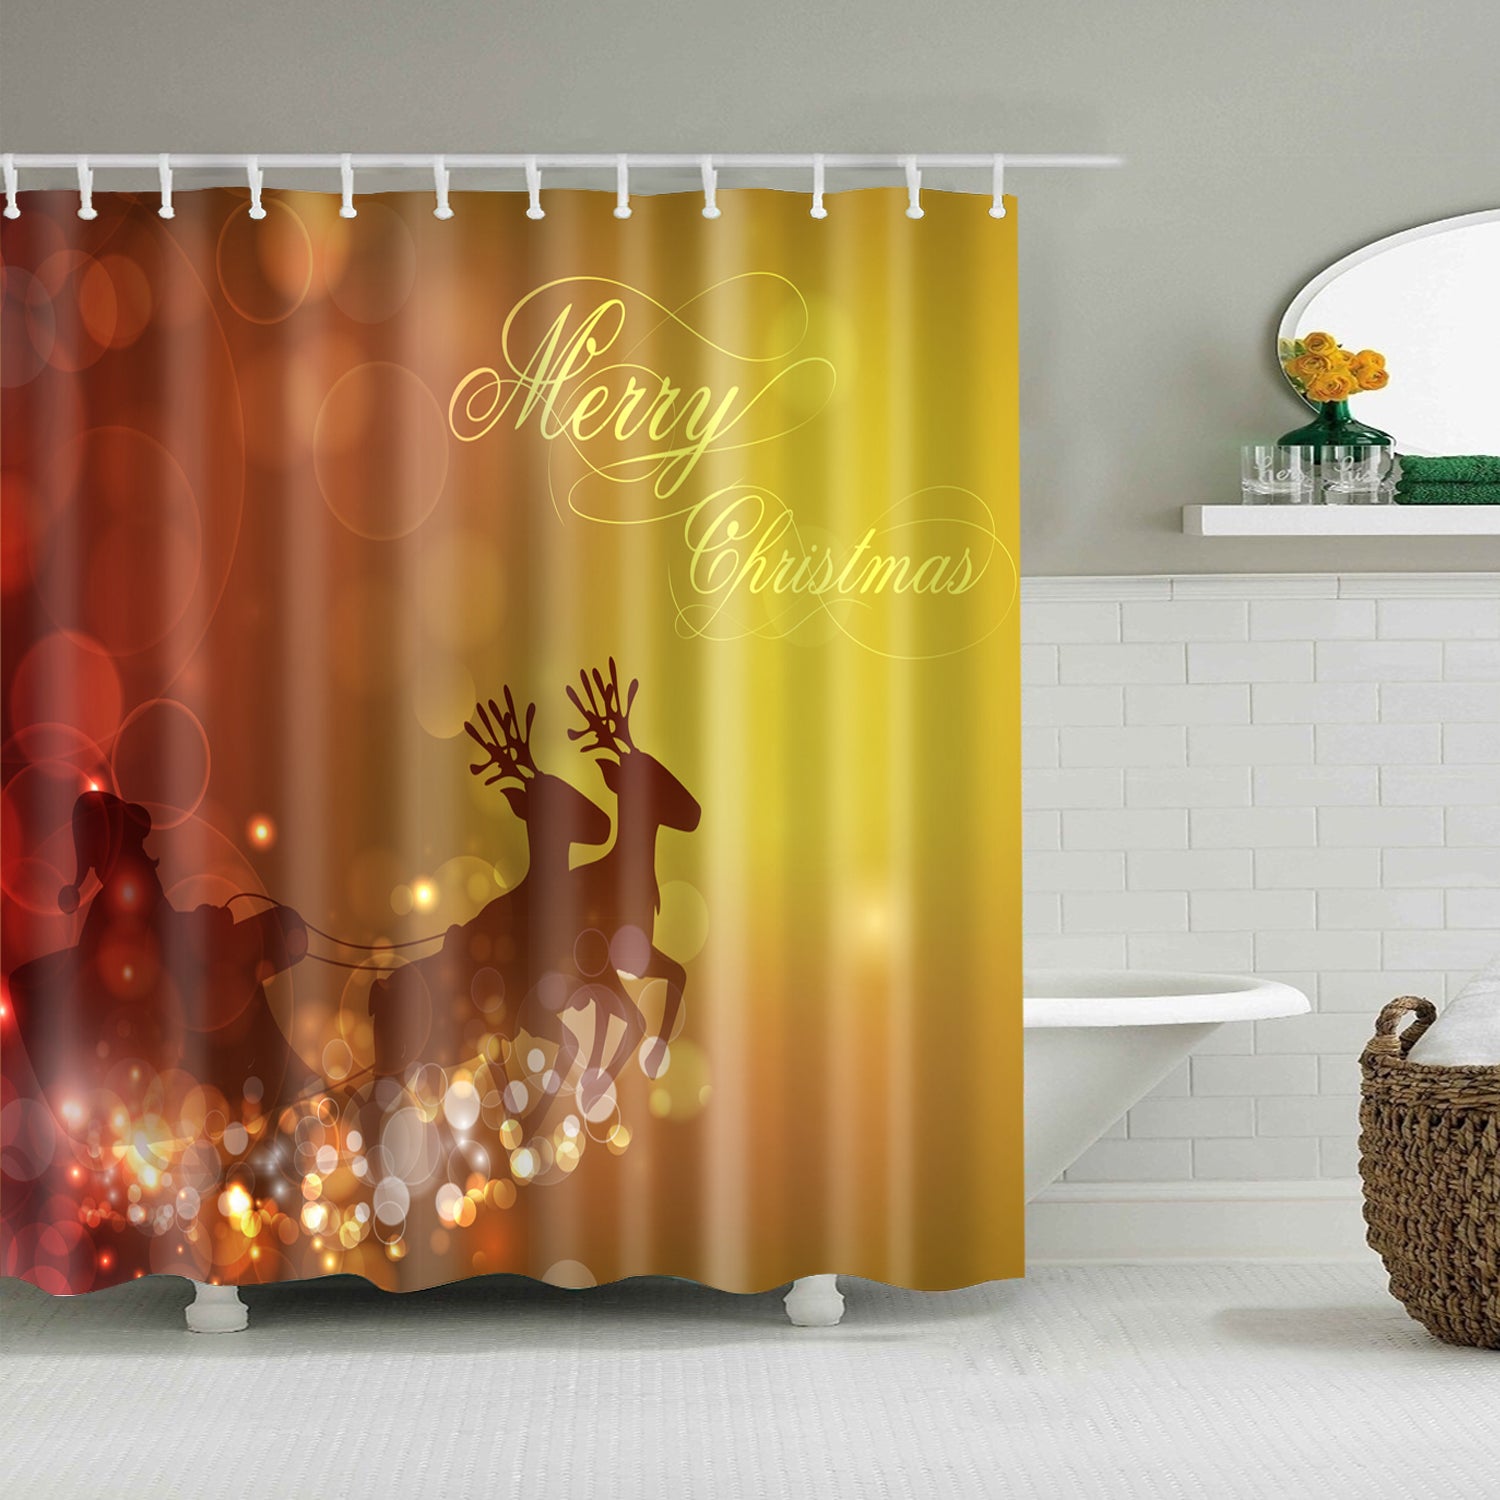 The Christmas Gift Coming Santa Riding Sleigh Shower Curtain